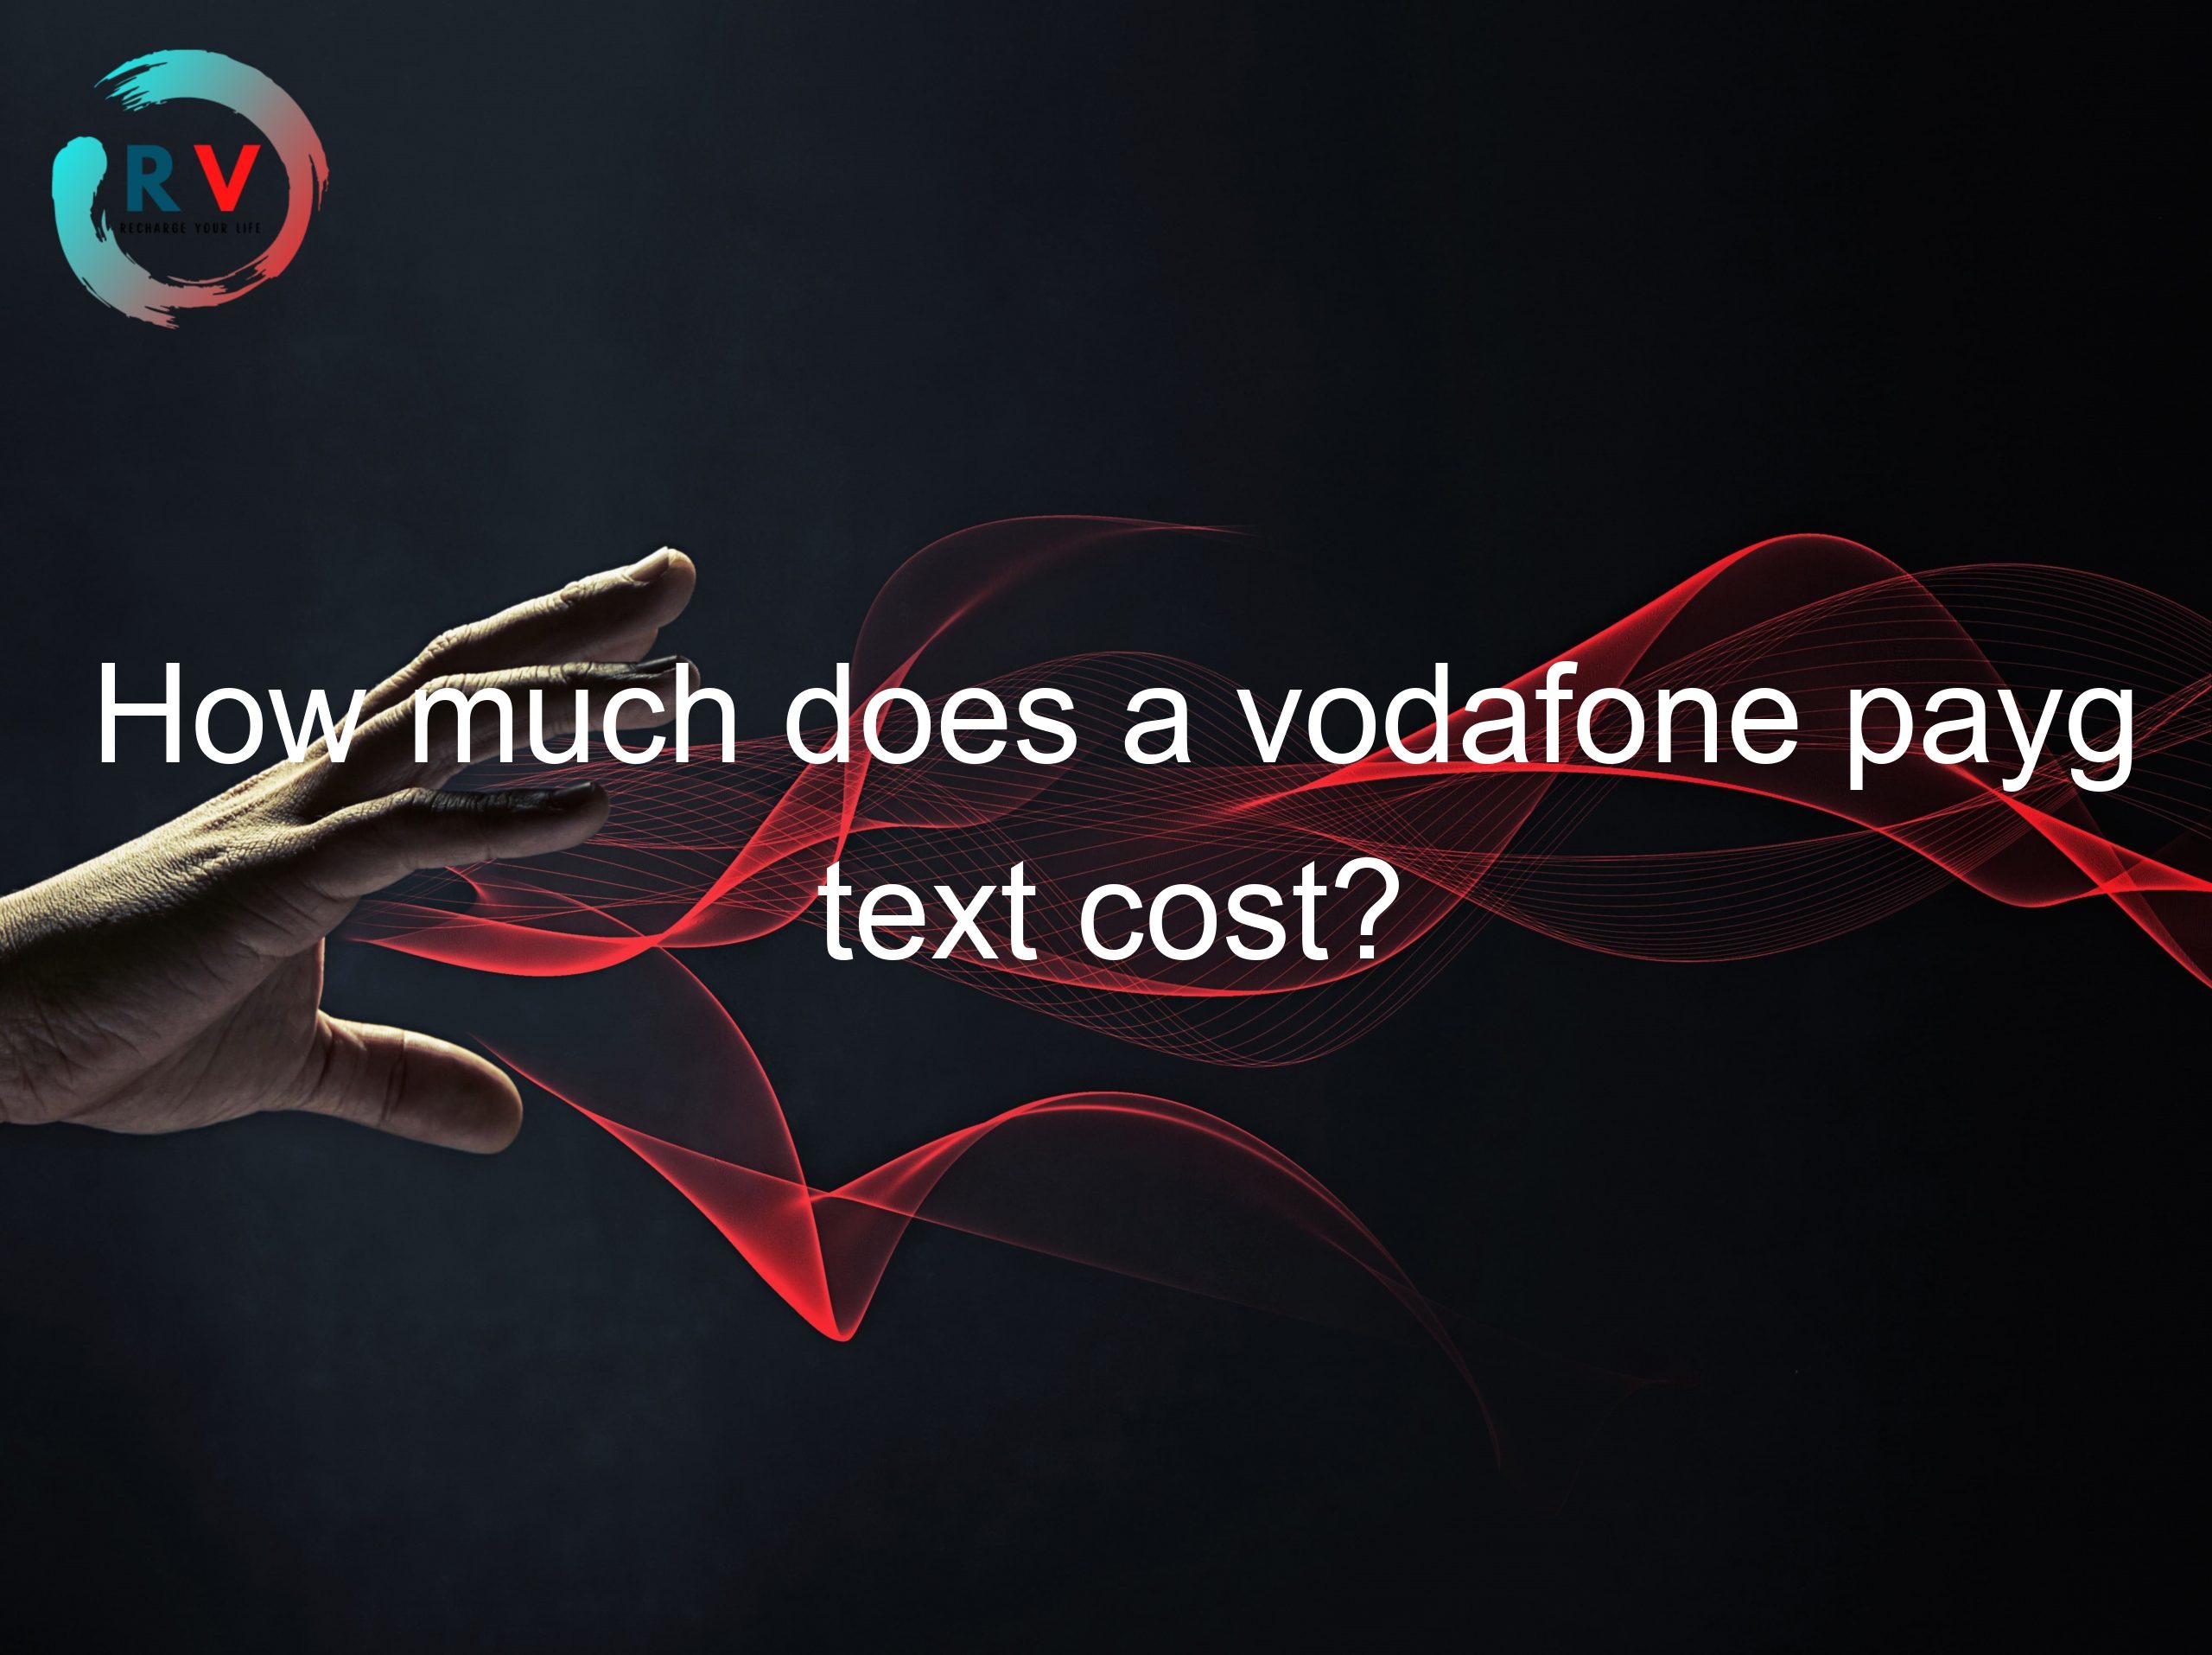 How much does a vodafone payg text cost?